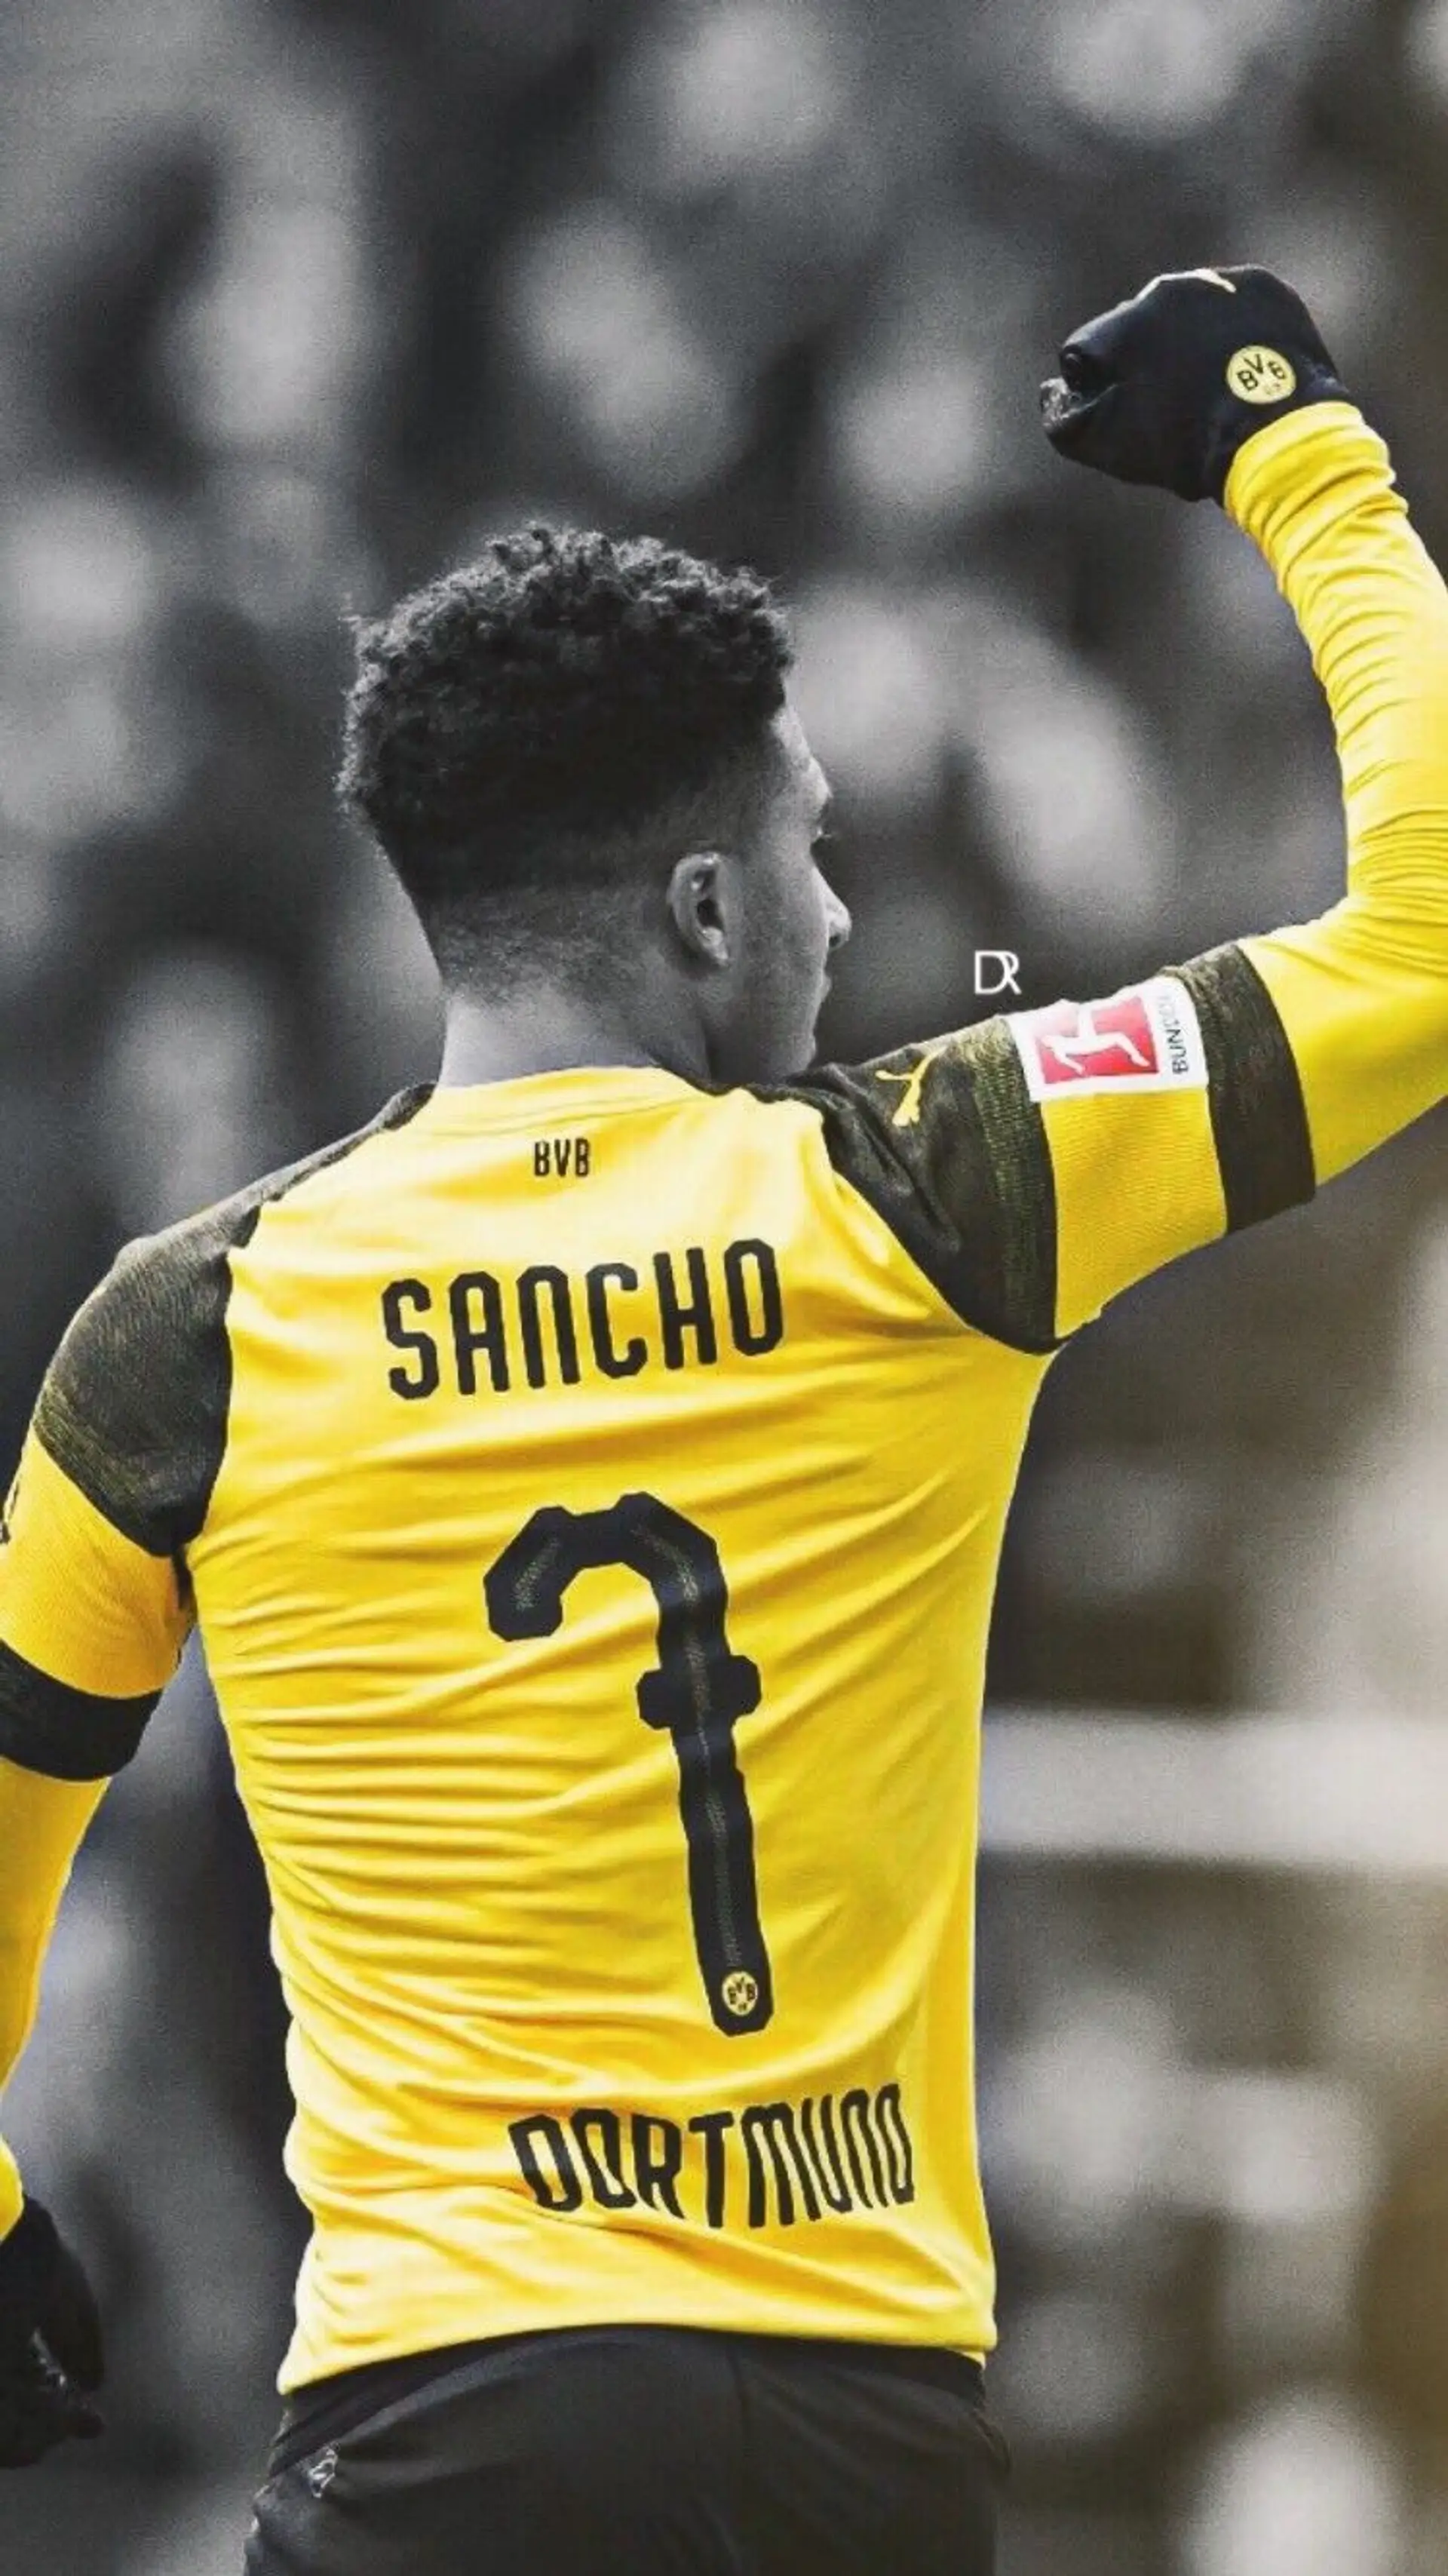 Manchester United Finally Agree Deal with Borussia Dortmund To Sign Jadon Sancho? 